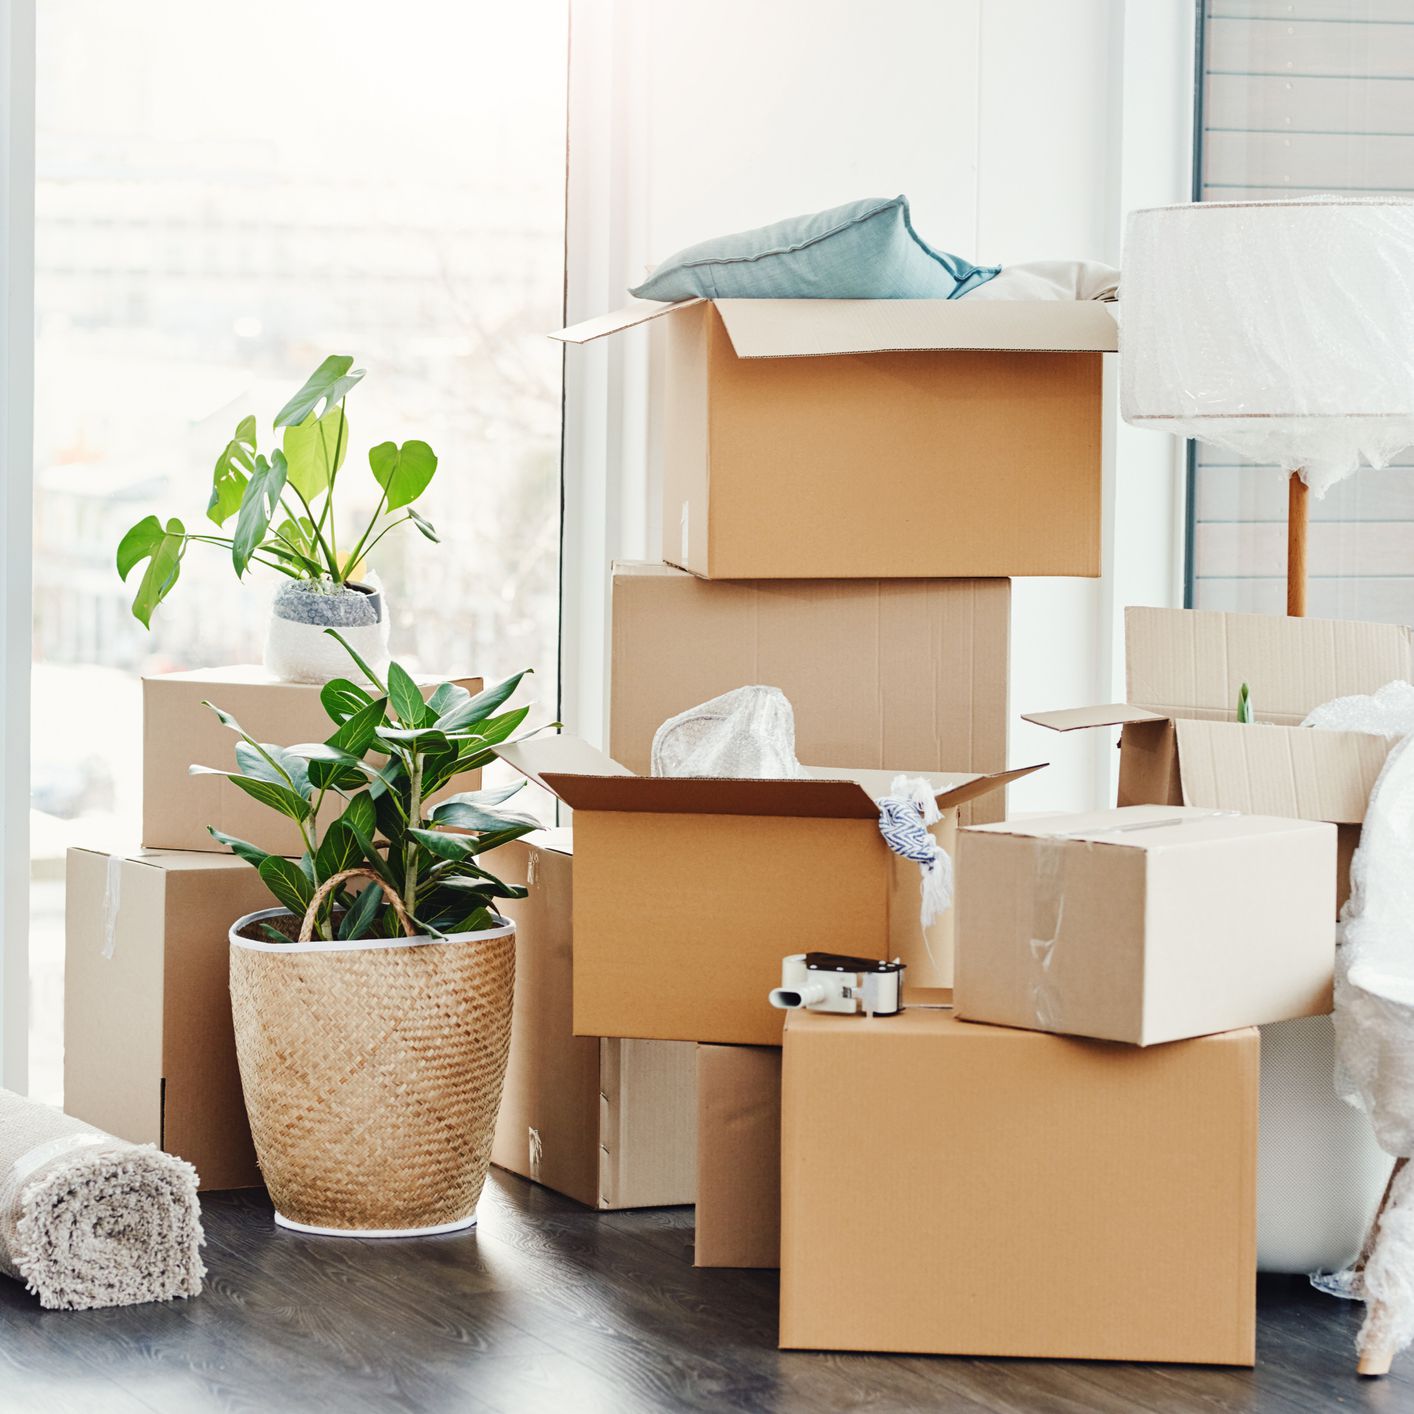 The Forgotten 5: What Not To Forget When You Move Home